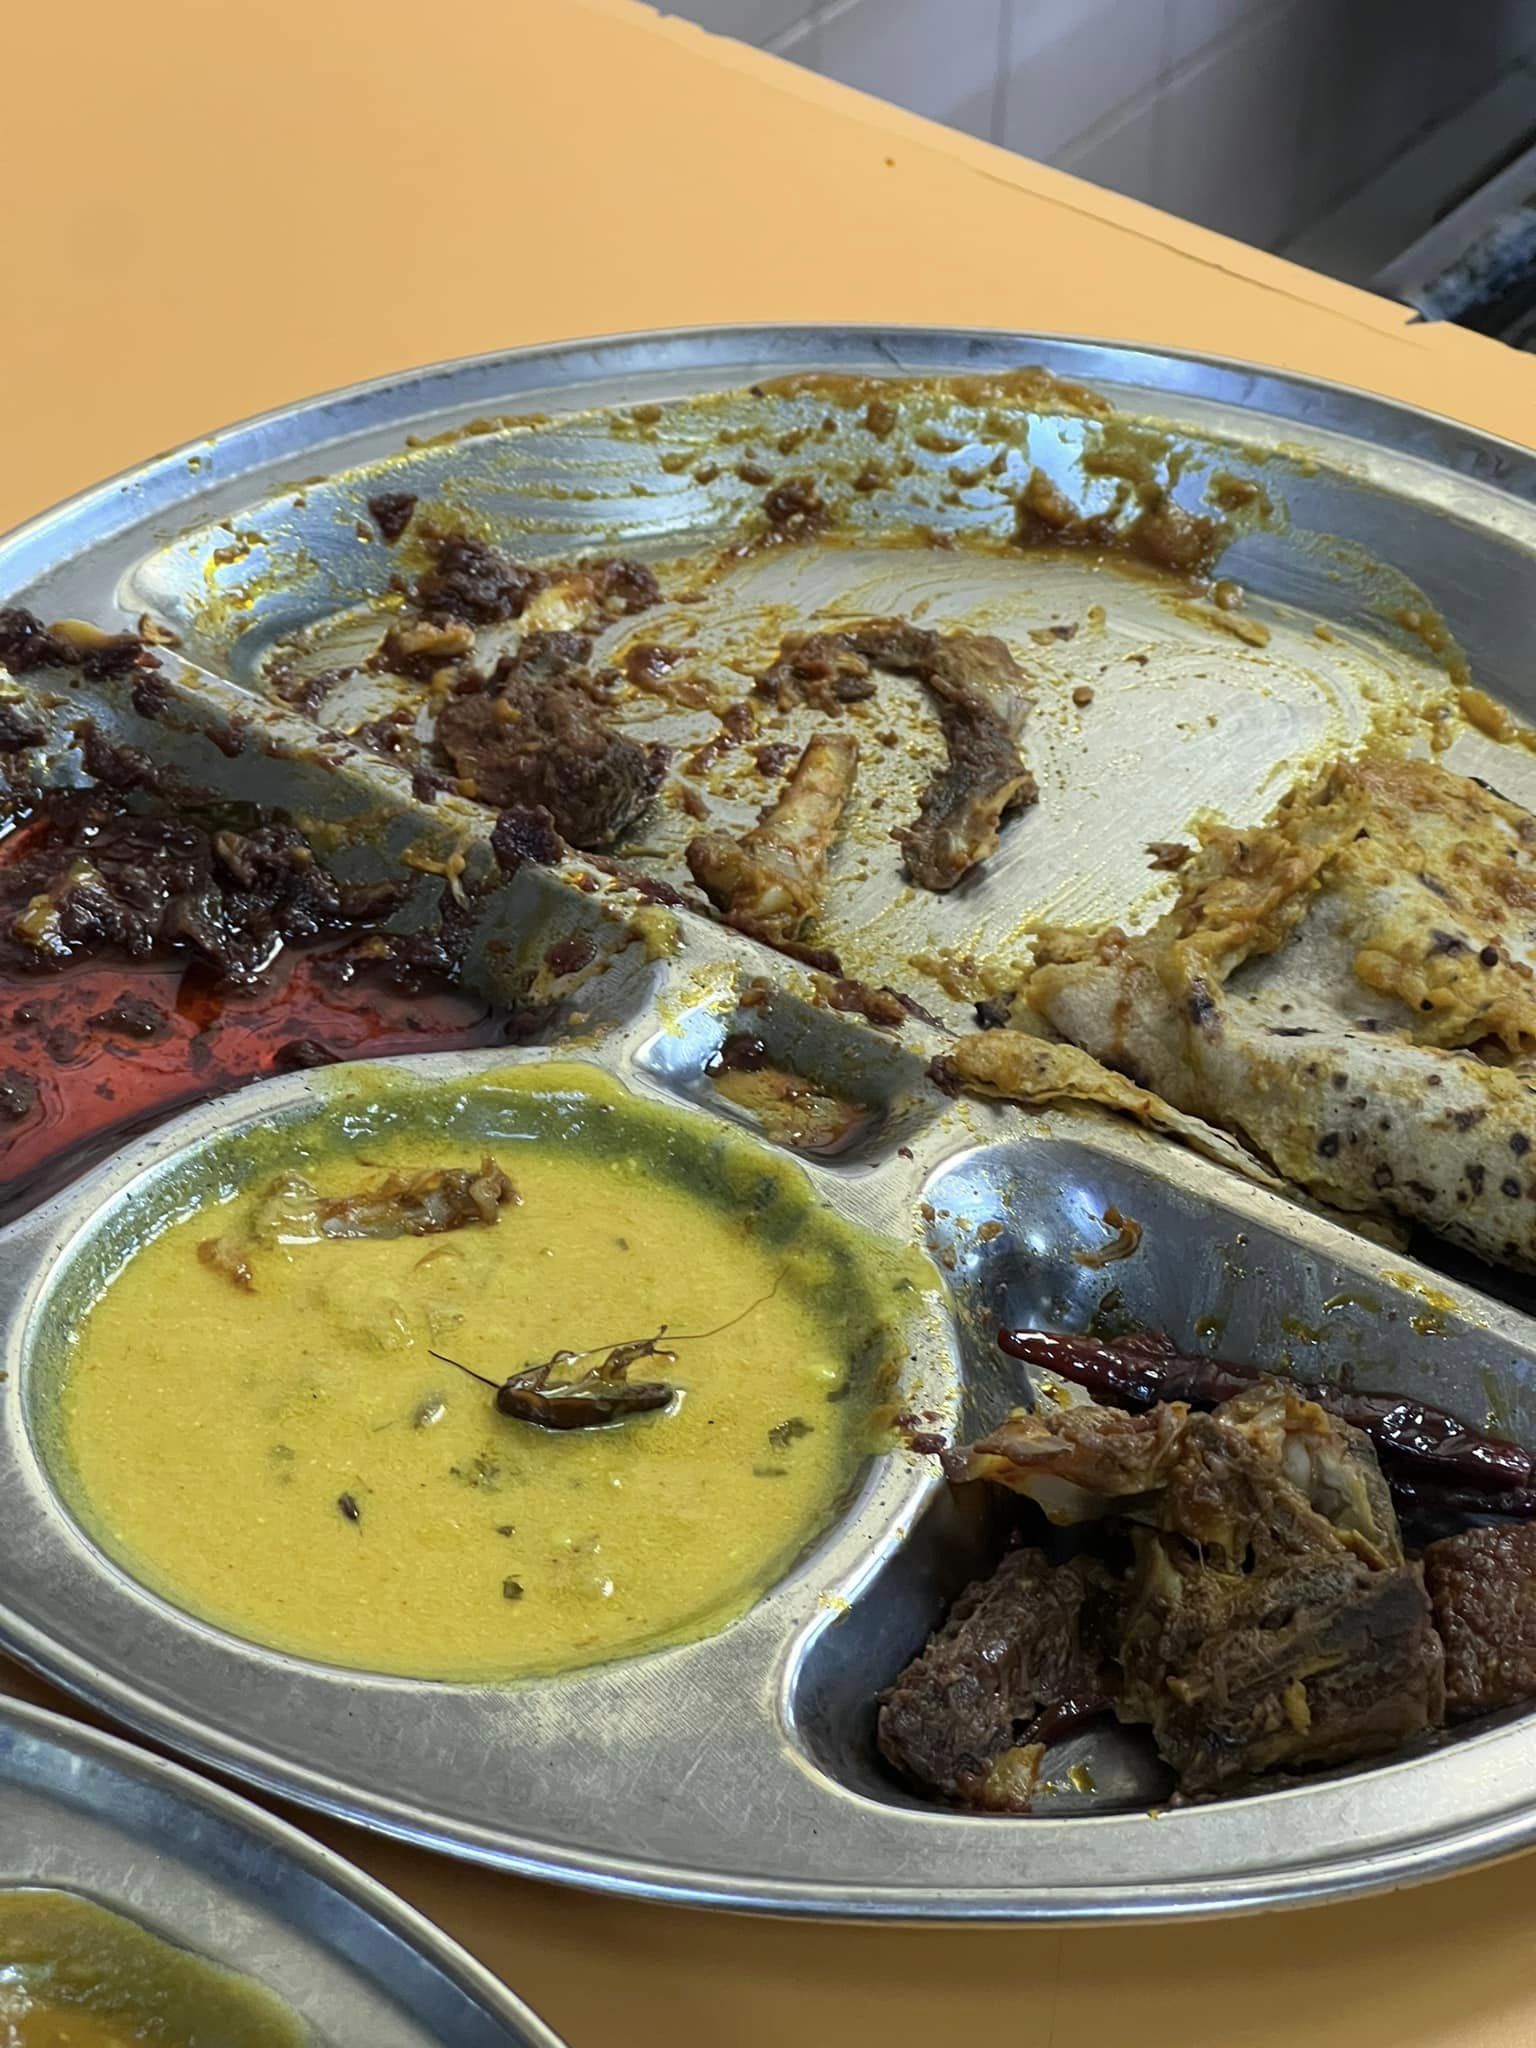 Dead cockroach found in dhal curry